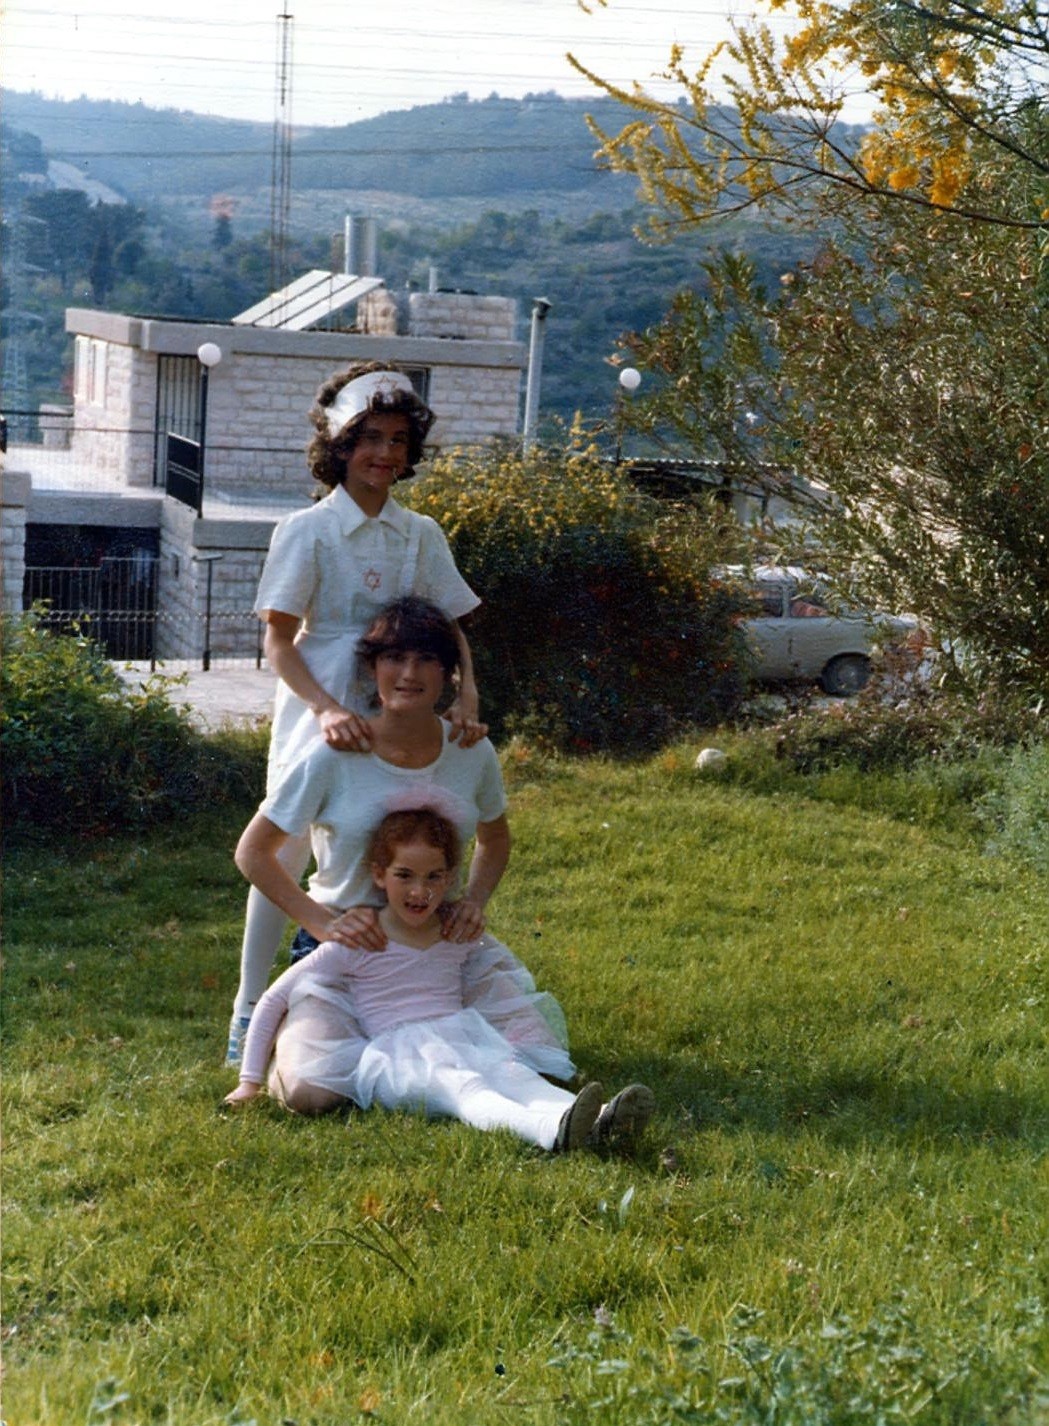 Left: MyHeritage’s founder and CEO, Gilad Japhet, wearing a wig and dressed as a nurse for the Purim holiday, together with his sisters in Jerusalem, 1978. Right: after color restoration, the photo looks as if it were taken yesterday.